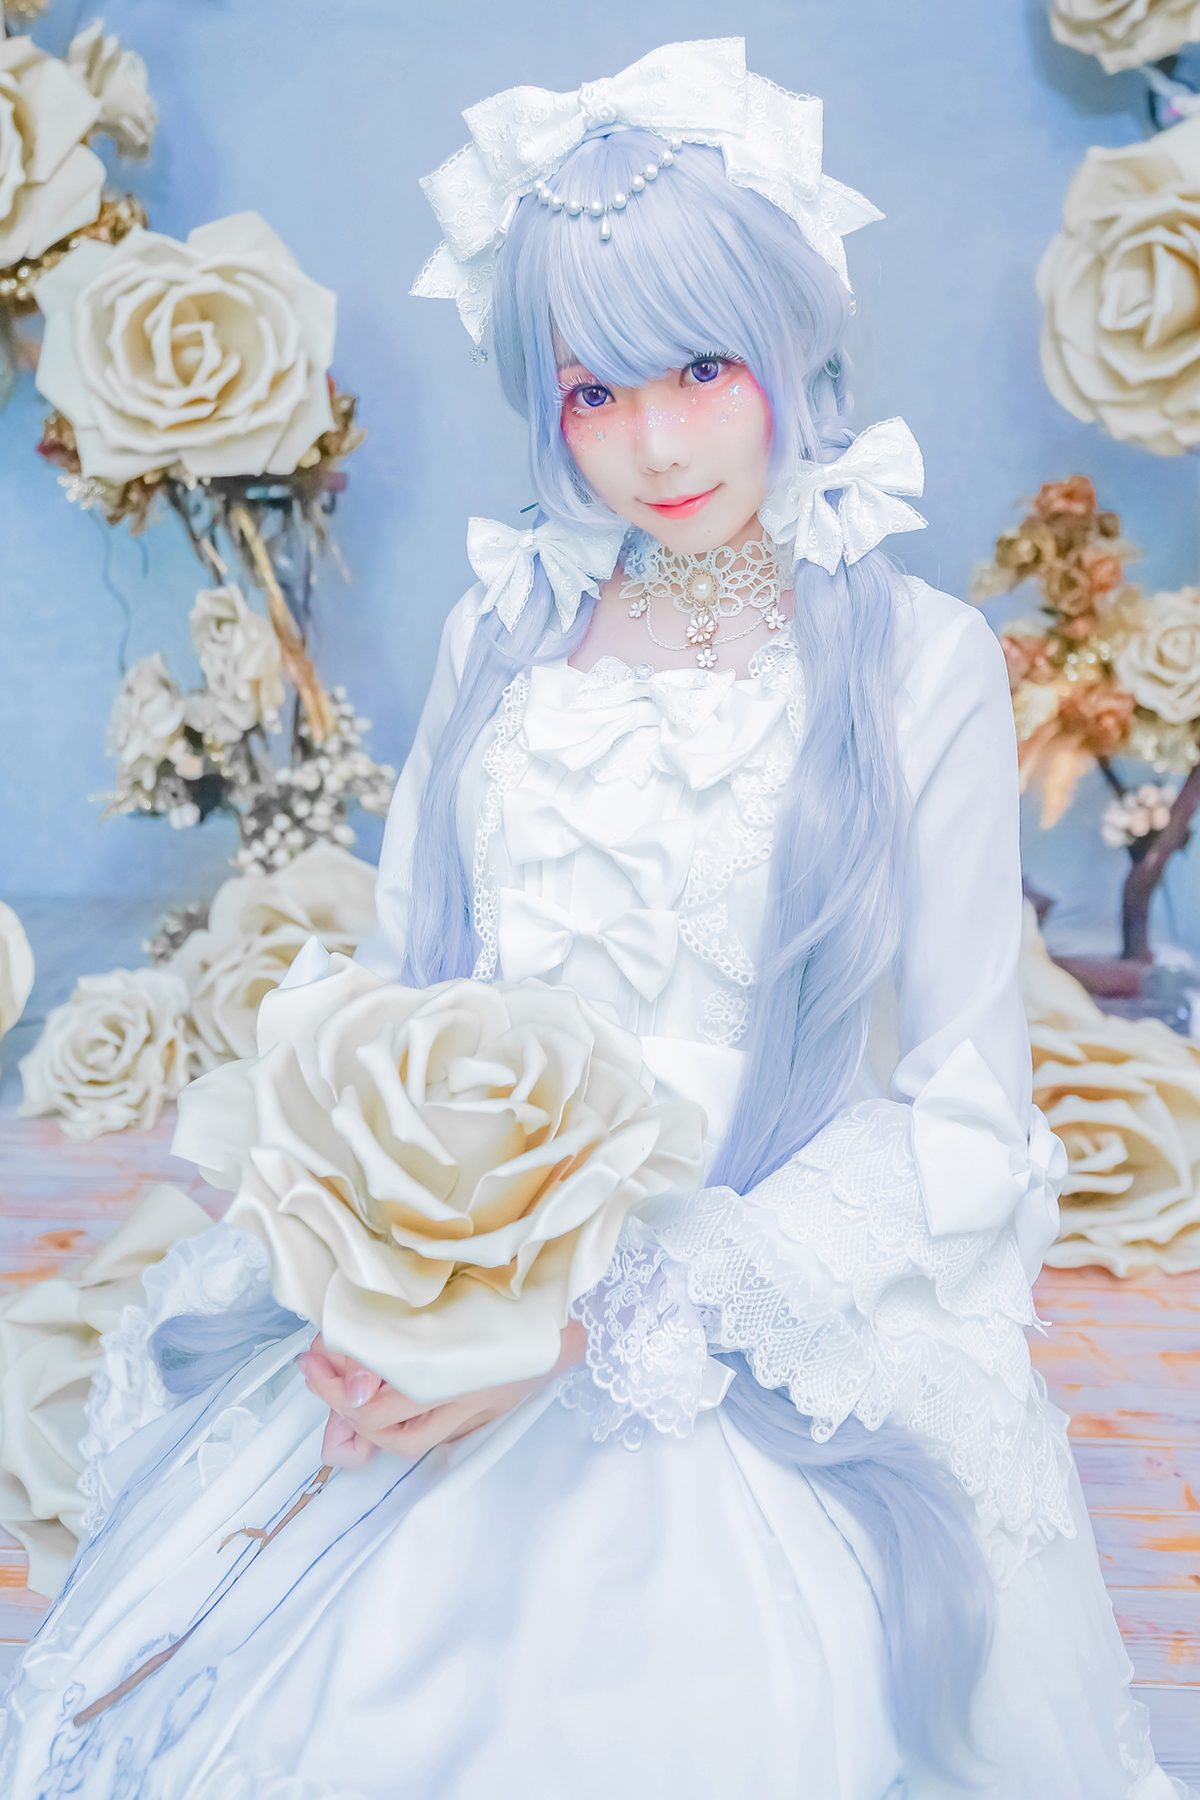 Coser@Ely_eee ElyEE子 TUESDAY TWINTAIL A 0052 5538835887.jpg